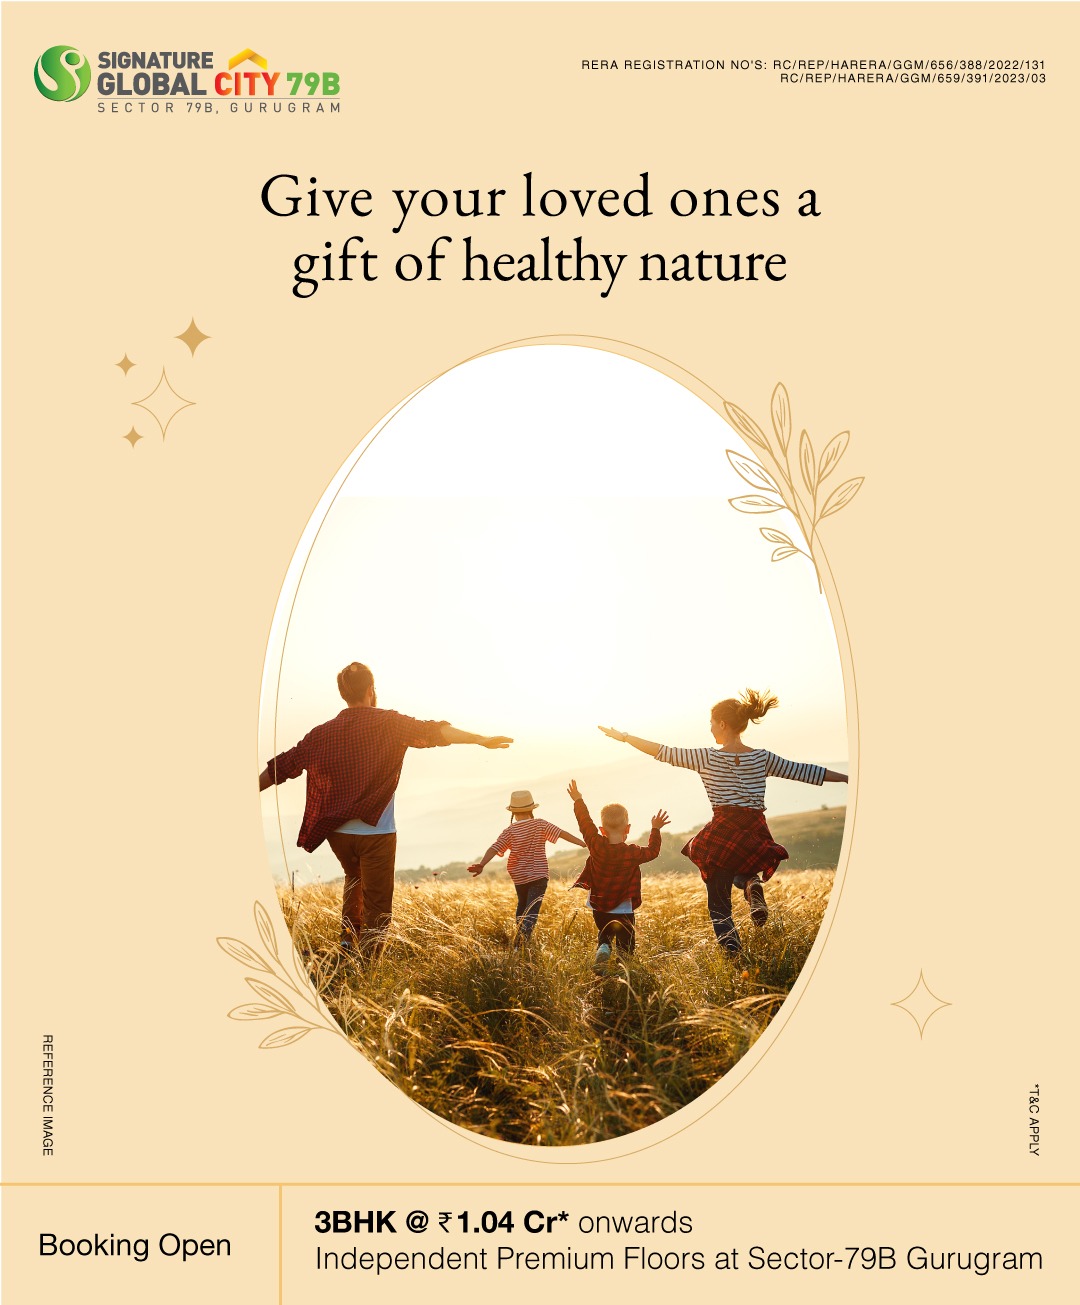 Gift your loved ones a healthy life in a dreamy habitat at Signature Global City 79B, Sector 79B, Gurgaon Update